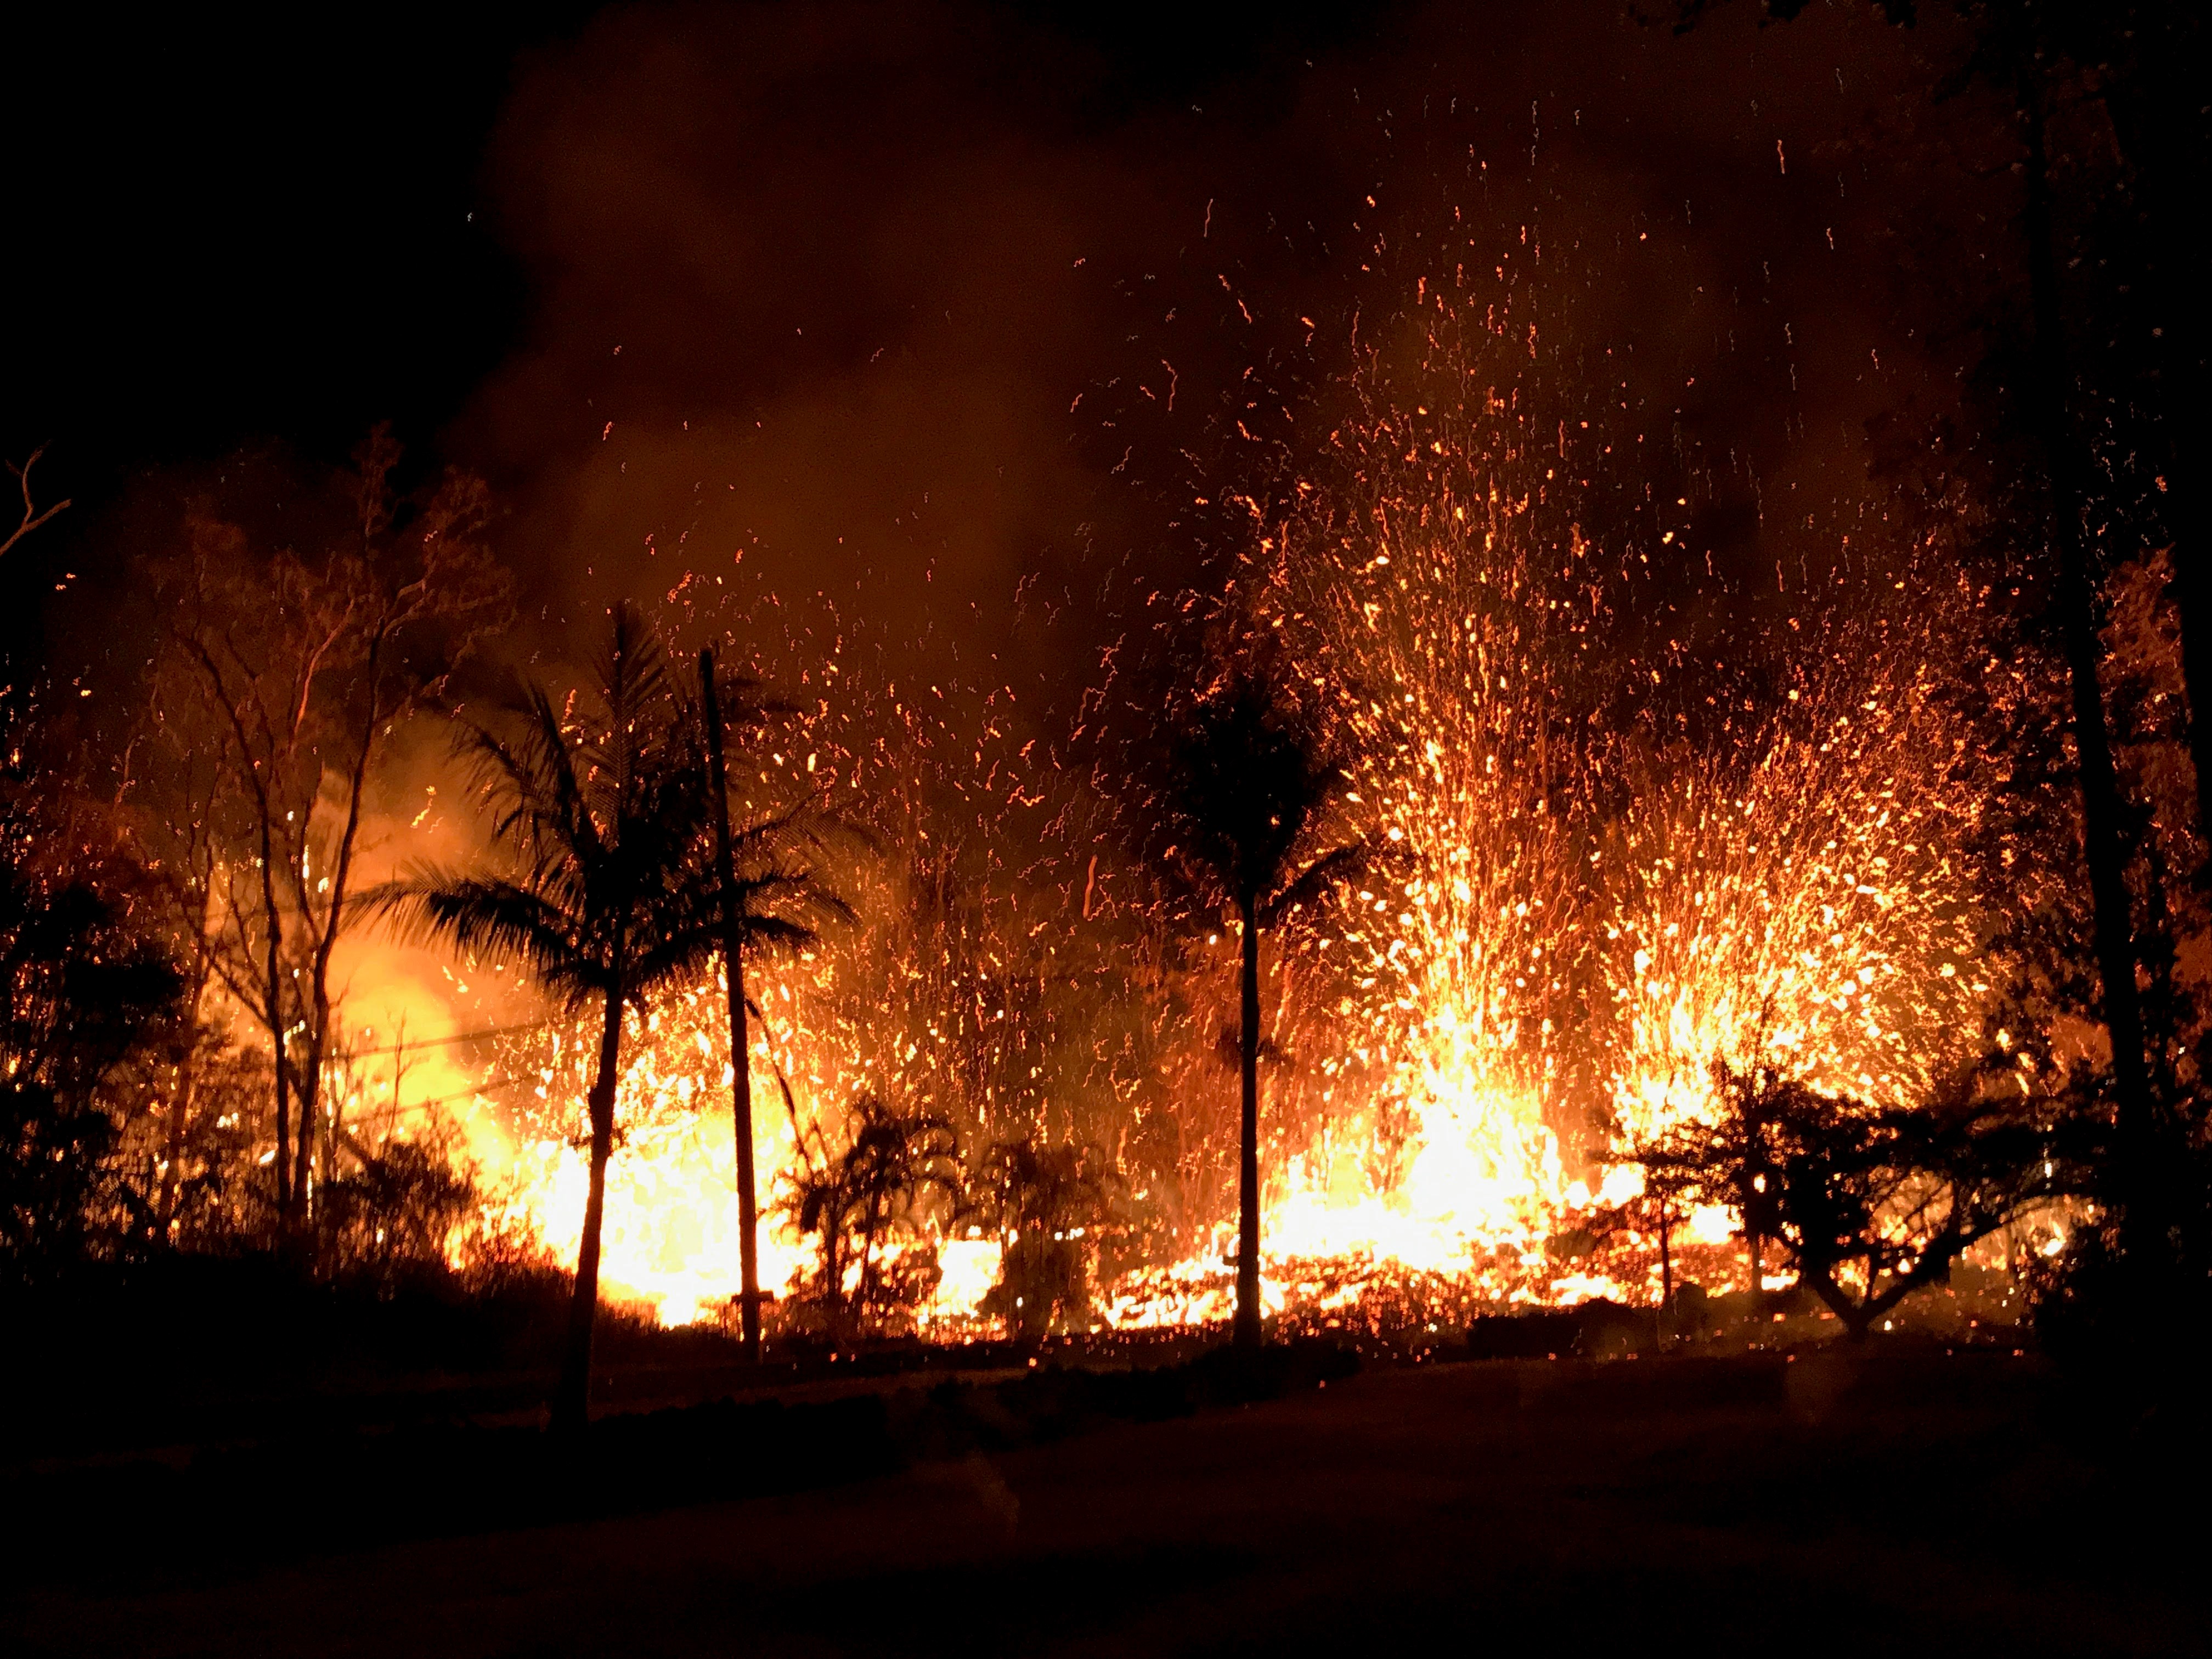 Fire breaks out at the forest as dozens of structures, including at least nine homes, have been destroyed by scorching lava flows following a massive volcano eruption on Hawaii's Big Island, USA on May 8, 2018. Hawaii's Kilauea volcano erupted Thursday triggering a series of earthquakes that have continued to rattle the island as burning blood-red lava spewed hundreds of feet in the air from cracks in the ground. The strongest earthquakes were felt Friday when a 5.6-magnitude temblor was followed an hour later by a 6.9-magnitude earthquake, according to the U.S. Geological Survey (USGS). (Anadolu Agency—Getty Images)